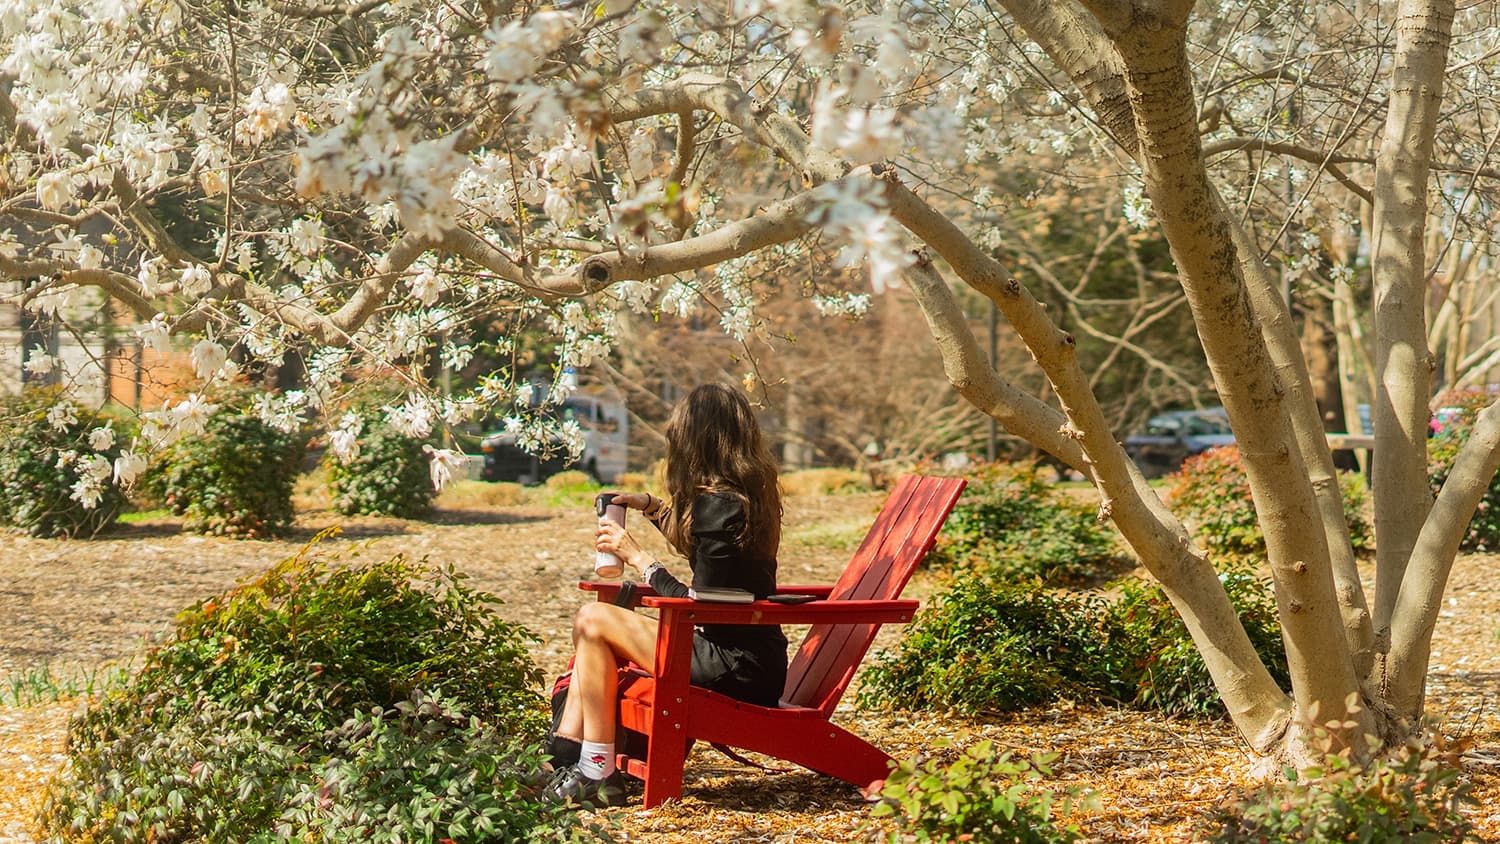 A student sits on a red chair under a blossoming tree.